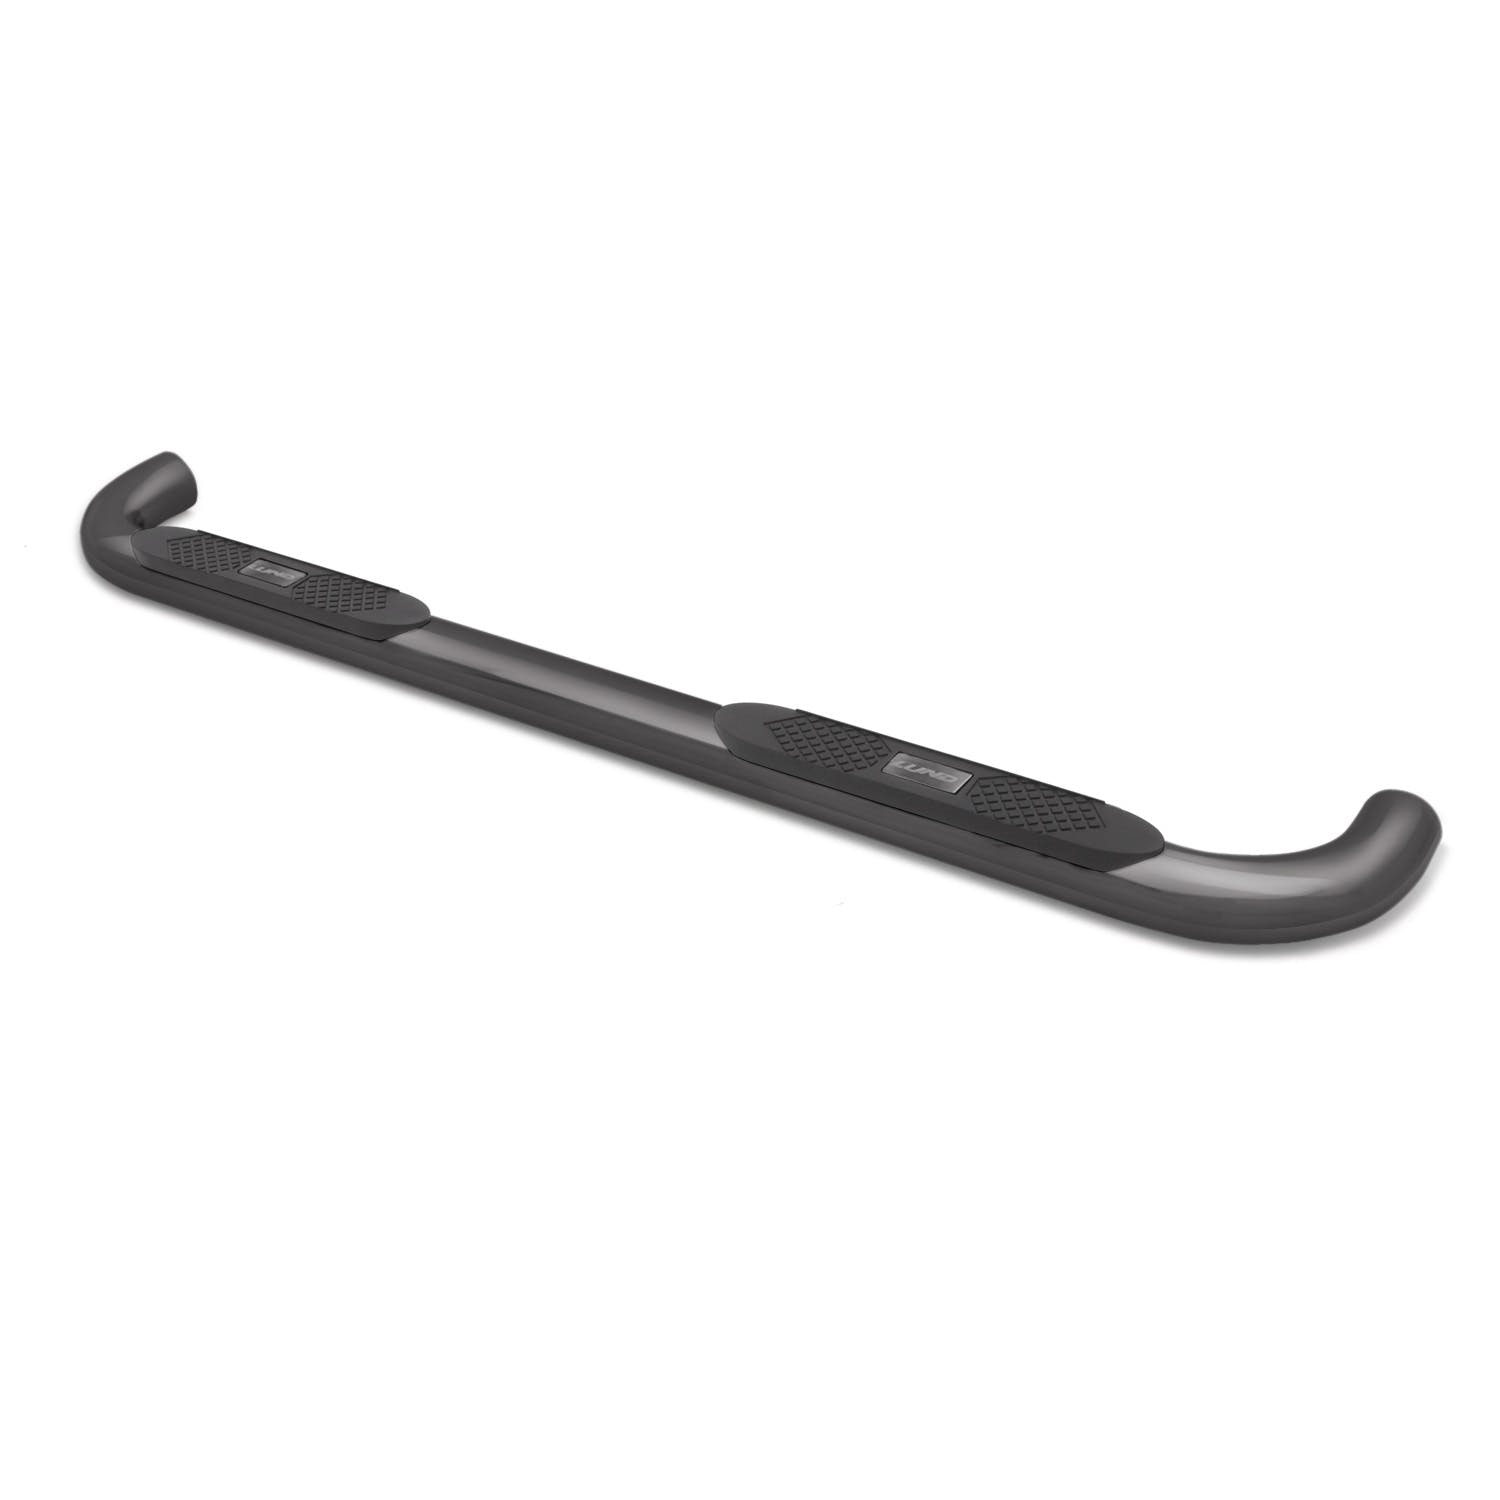 LUND 23466412 4 Inch Oval Curved Nerf Bar - Black 4 In OVAL CURVED STEEL